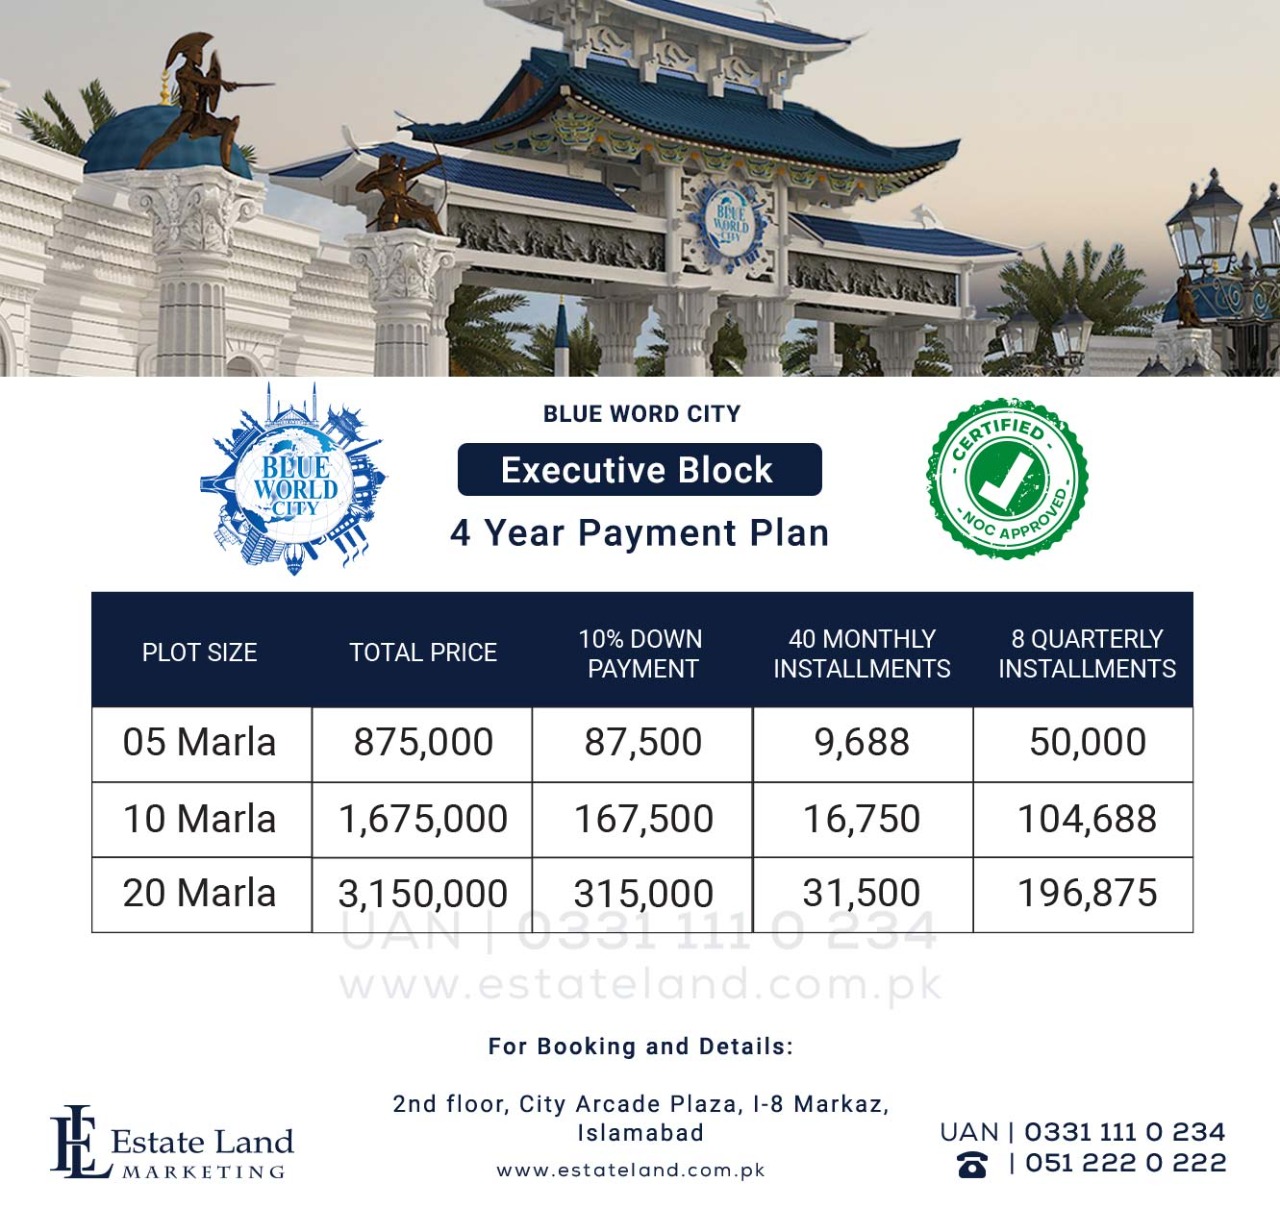 Executive Block Payment Plan 2021 in blue world city